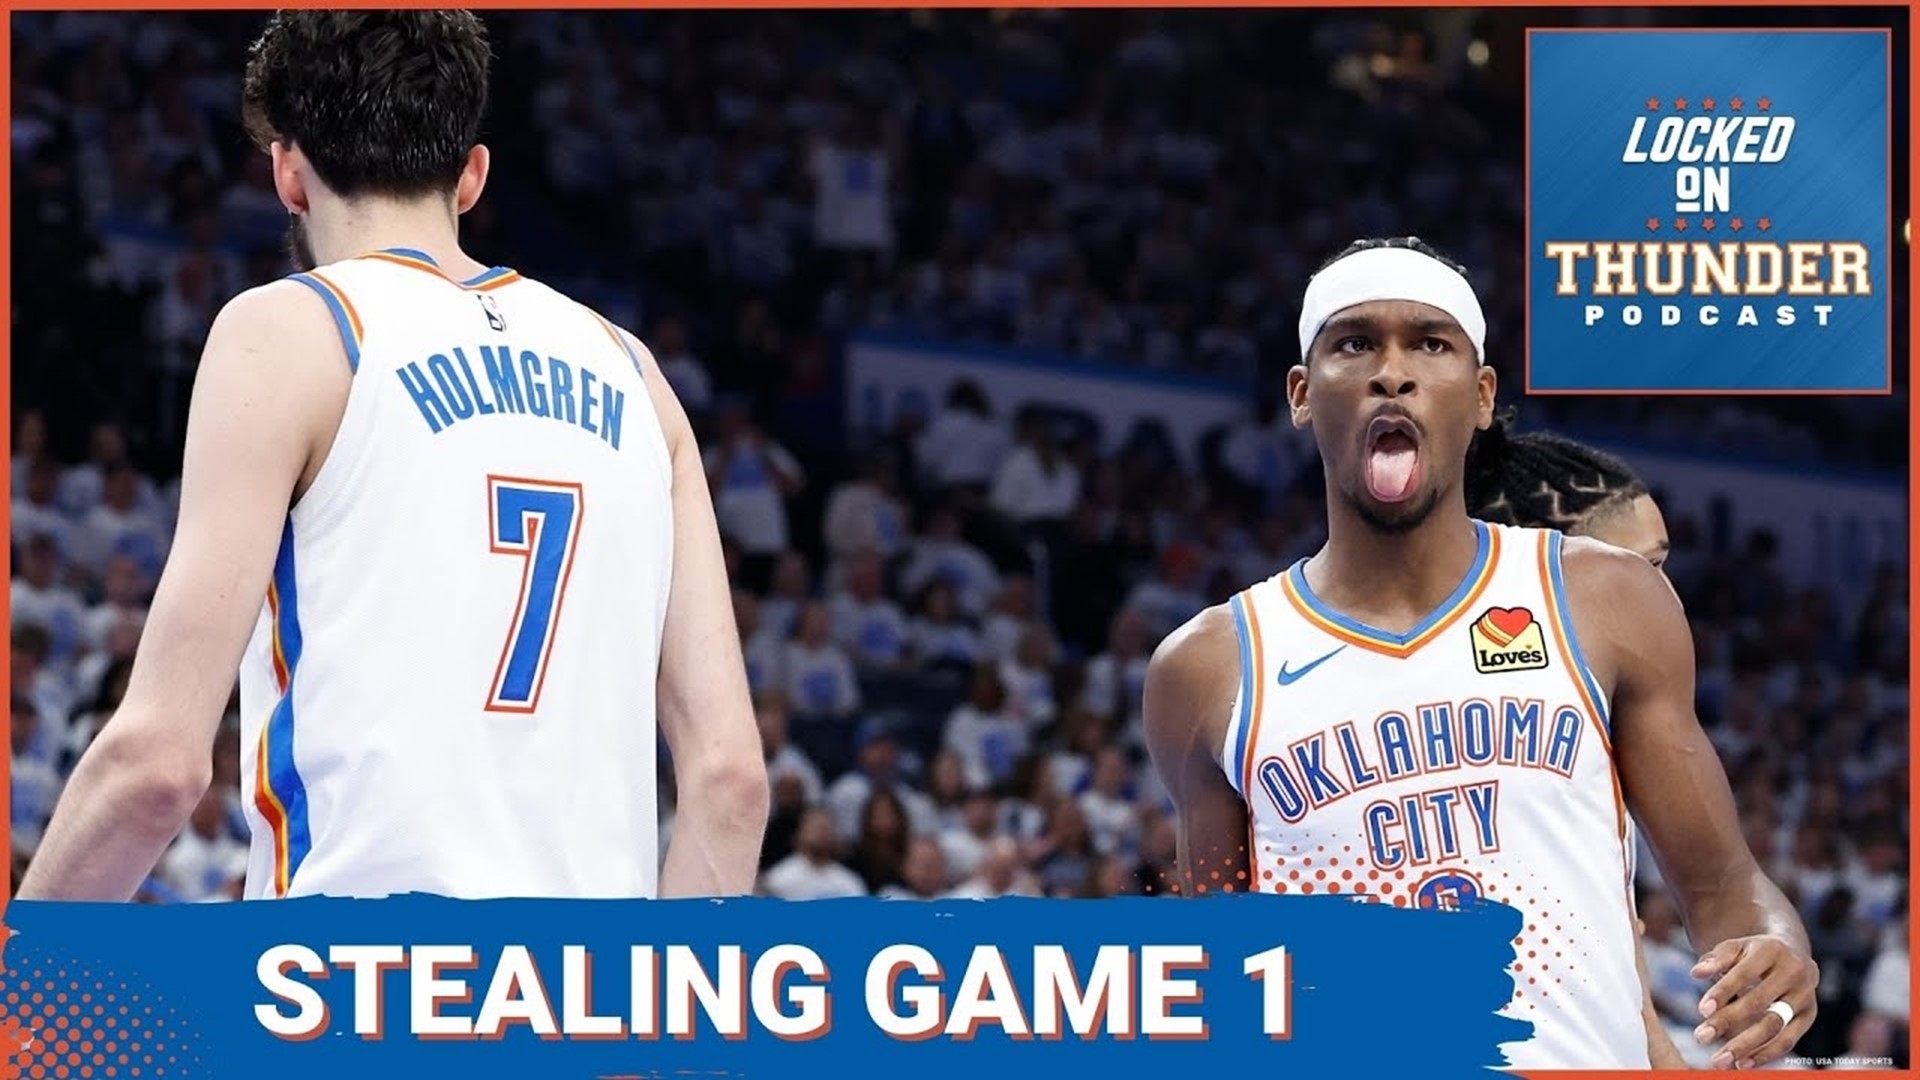 The Oklahoma City Thunder knock off the New Orleans Pelicans in Game 1 stealing the game in the NBA Playoffs despite not playing their best.